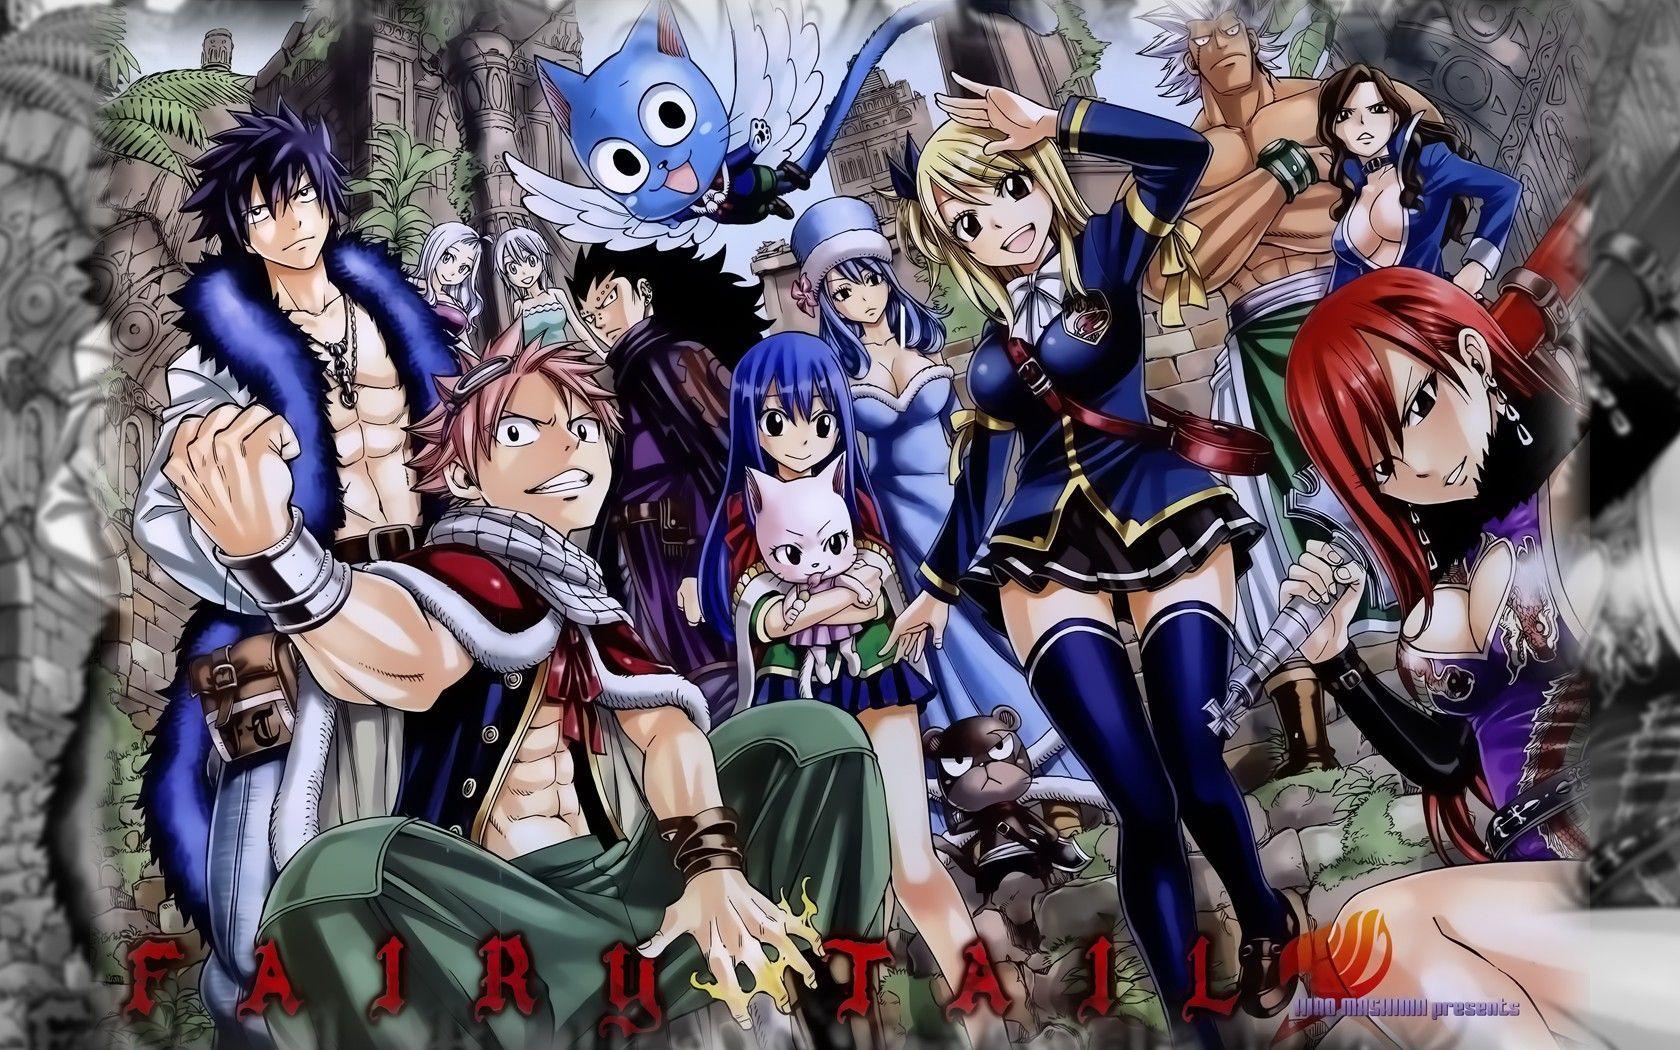 Download Fairy Tail Anime Wallpaper 1680x1050. Download Wallpaper